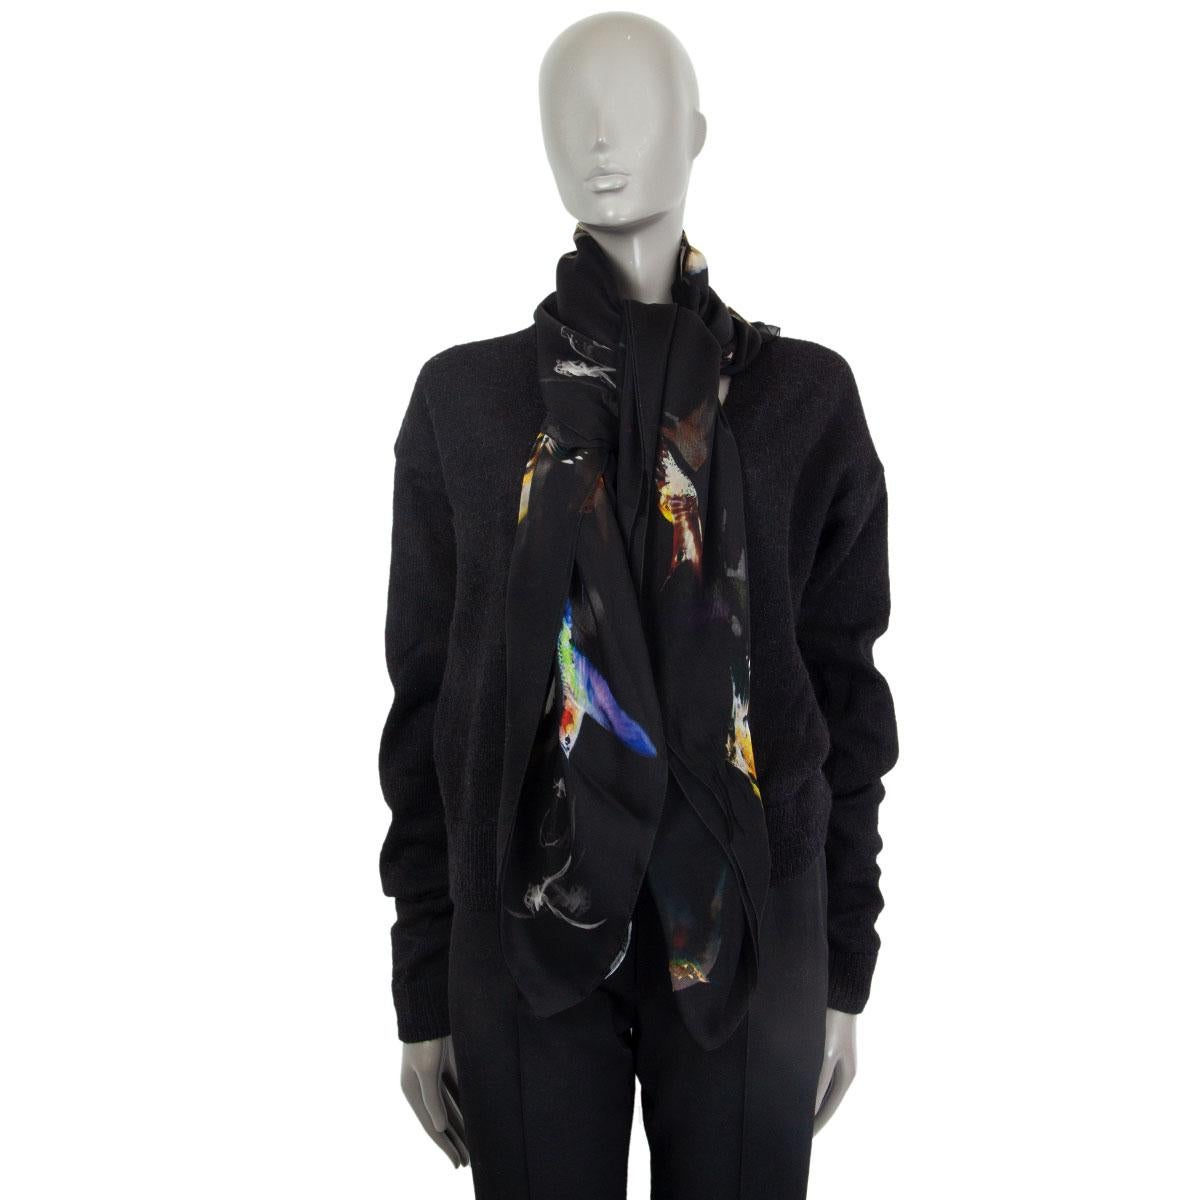 Alexander McQueen hummingbrid-print scarf in black and multicolor silk chiffon (100%). Has been worn and is in excellent condition. 

Width 127cm (49.5in)
Length 190cm (74.1in)
